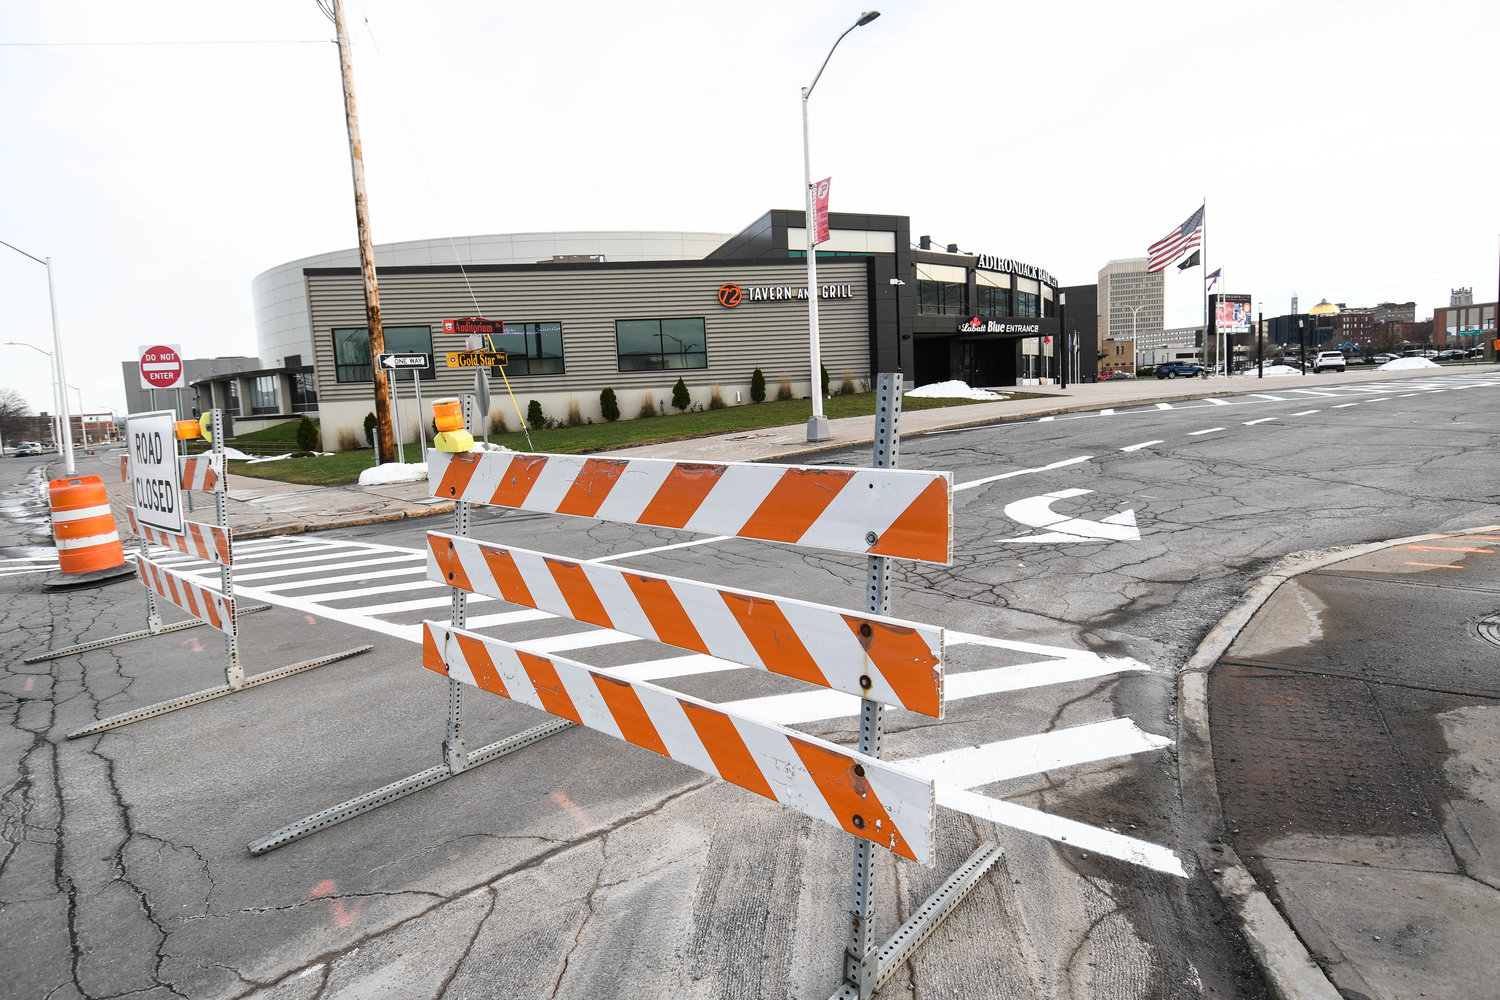 Auditorium Drive, adjacent to the Adirondack Bank Center at the Utica Memorial Auditorium, is now a one-way street according to officials with the New York State Department of Transportation.